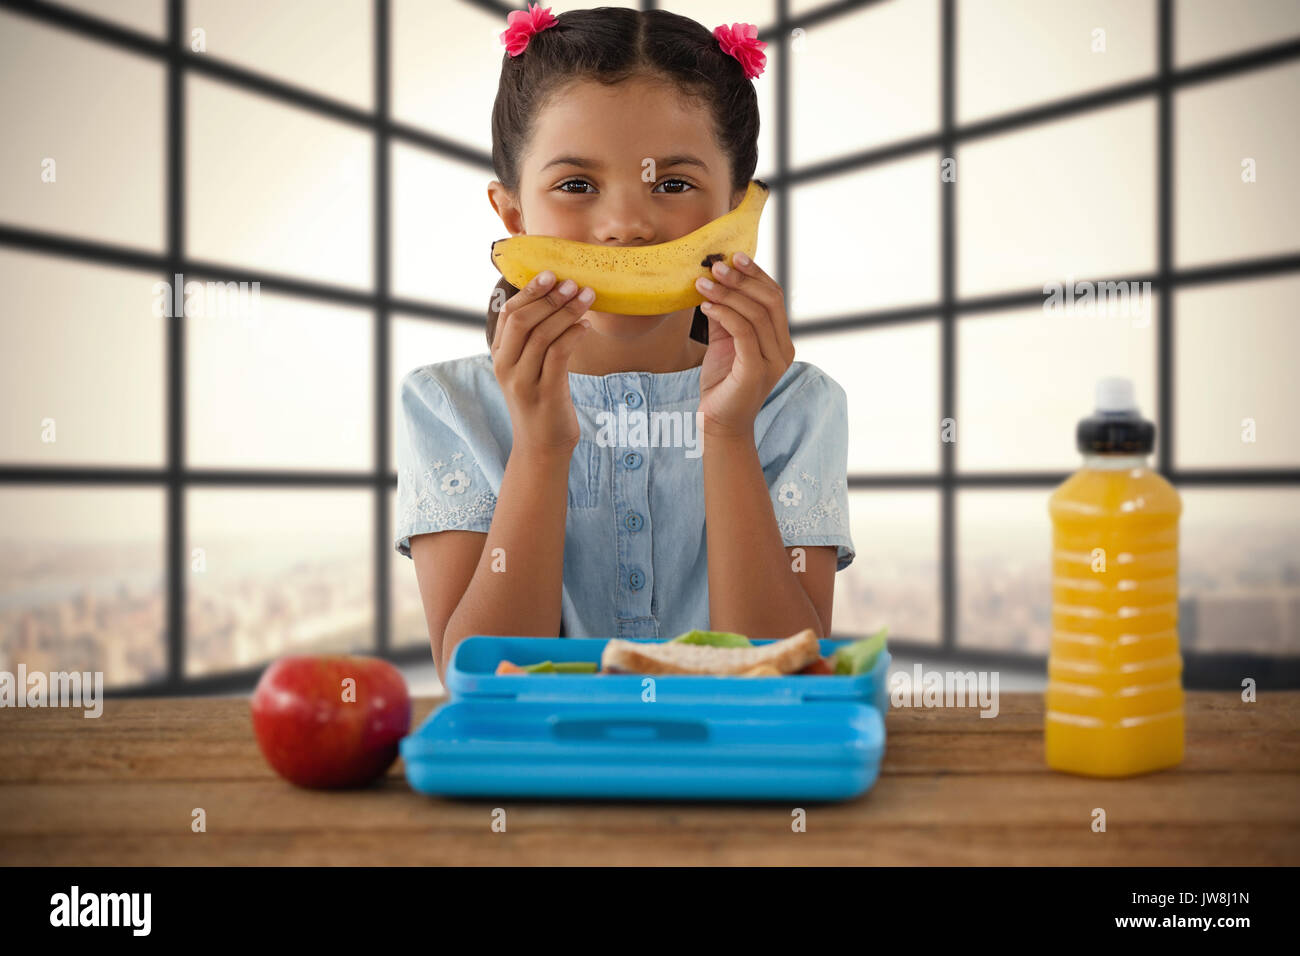 Girl holding banana at table against room with large window showing city Stock Photo